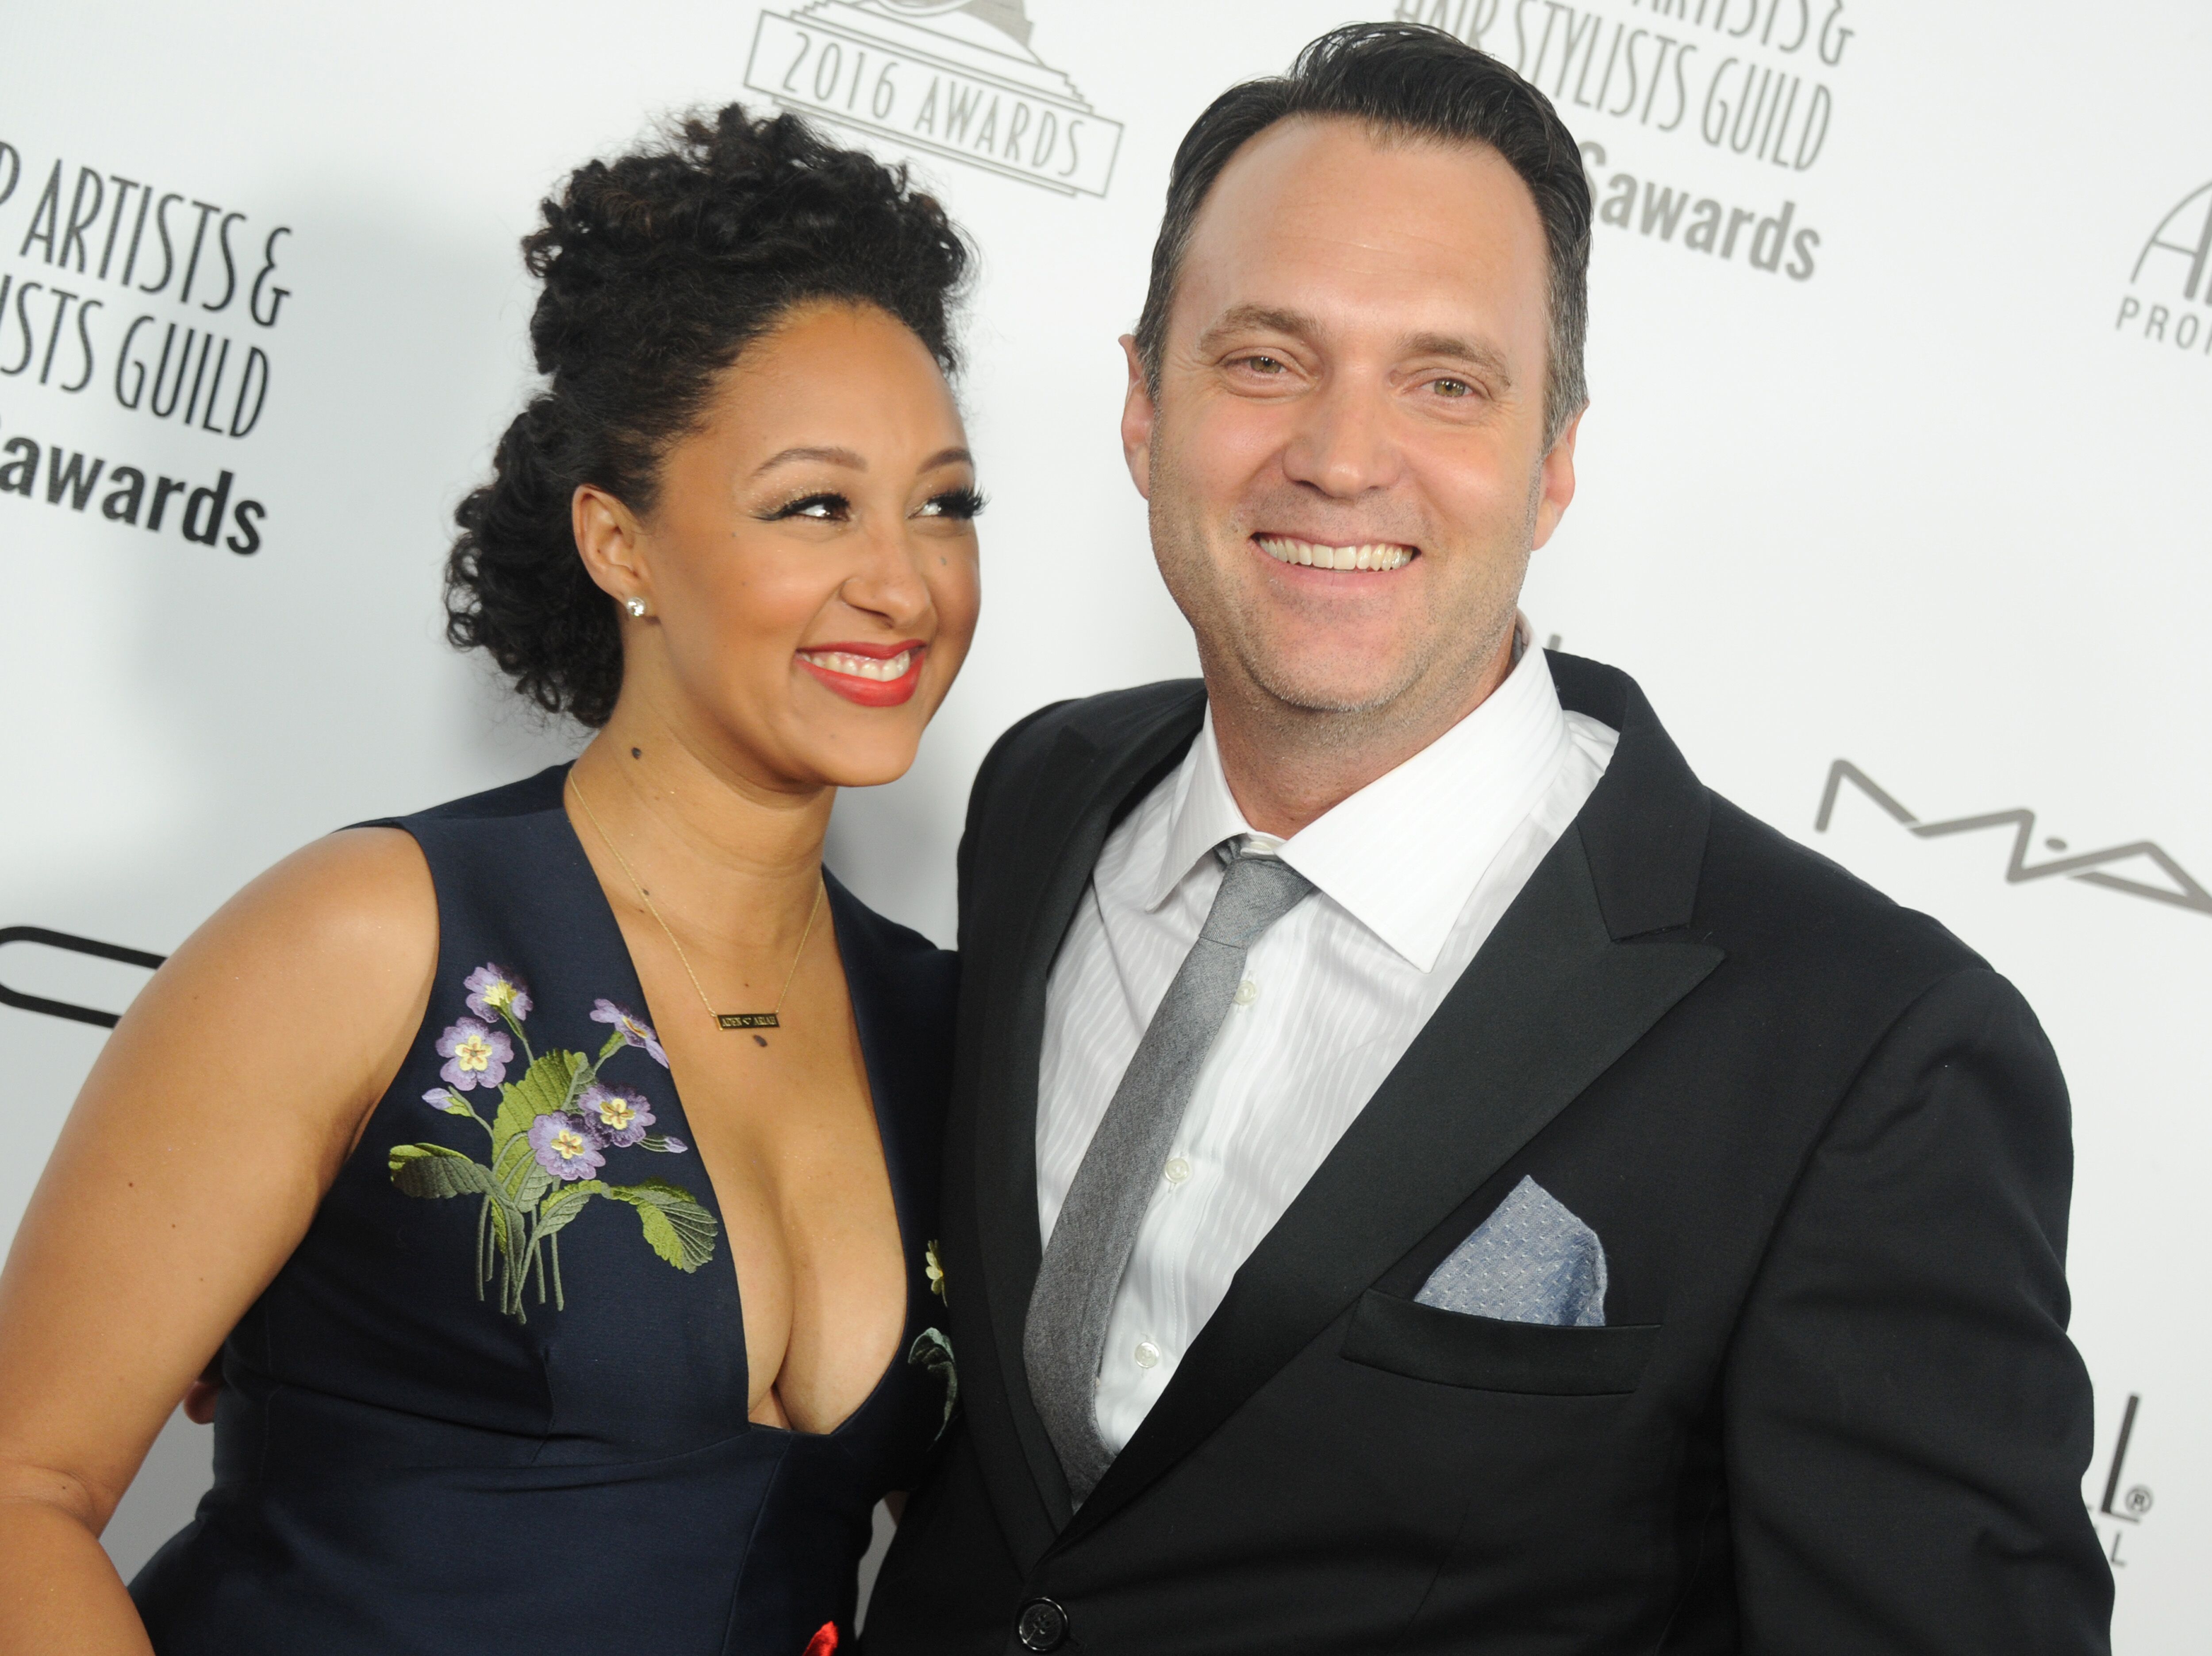 Tamara Hously-Mowry and Adam Housley/ Source: Getty Images